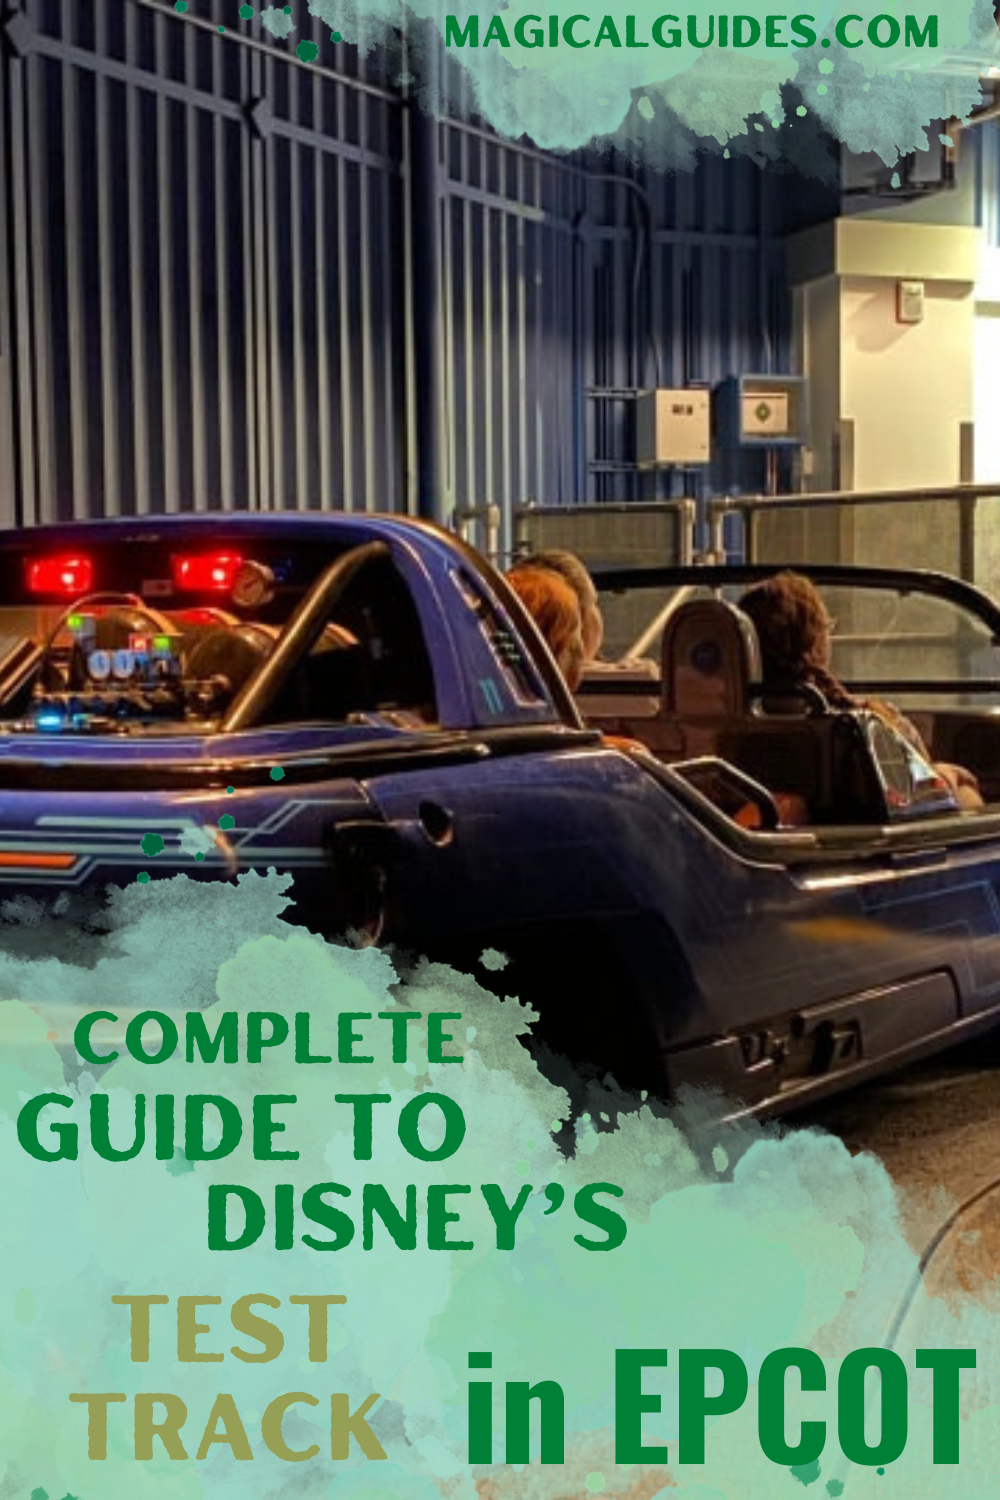 Complete guide to Test Track in EPCOT, everything you need to know before you ride.